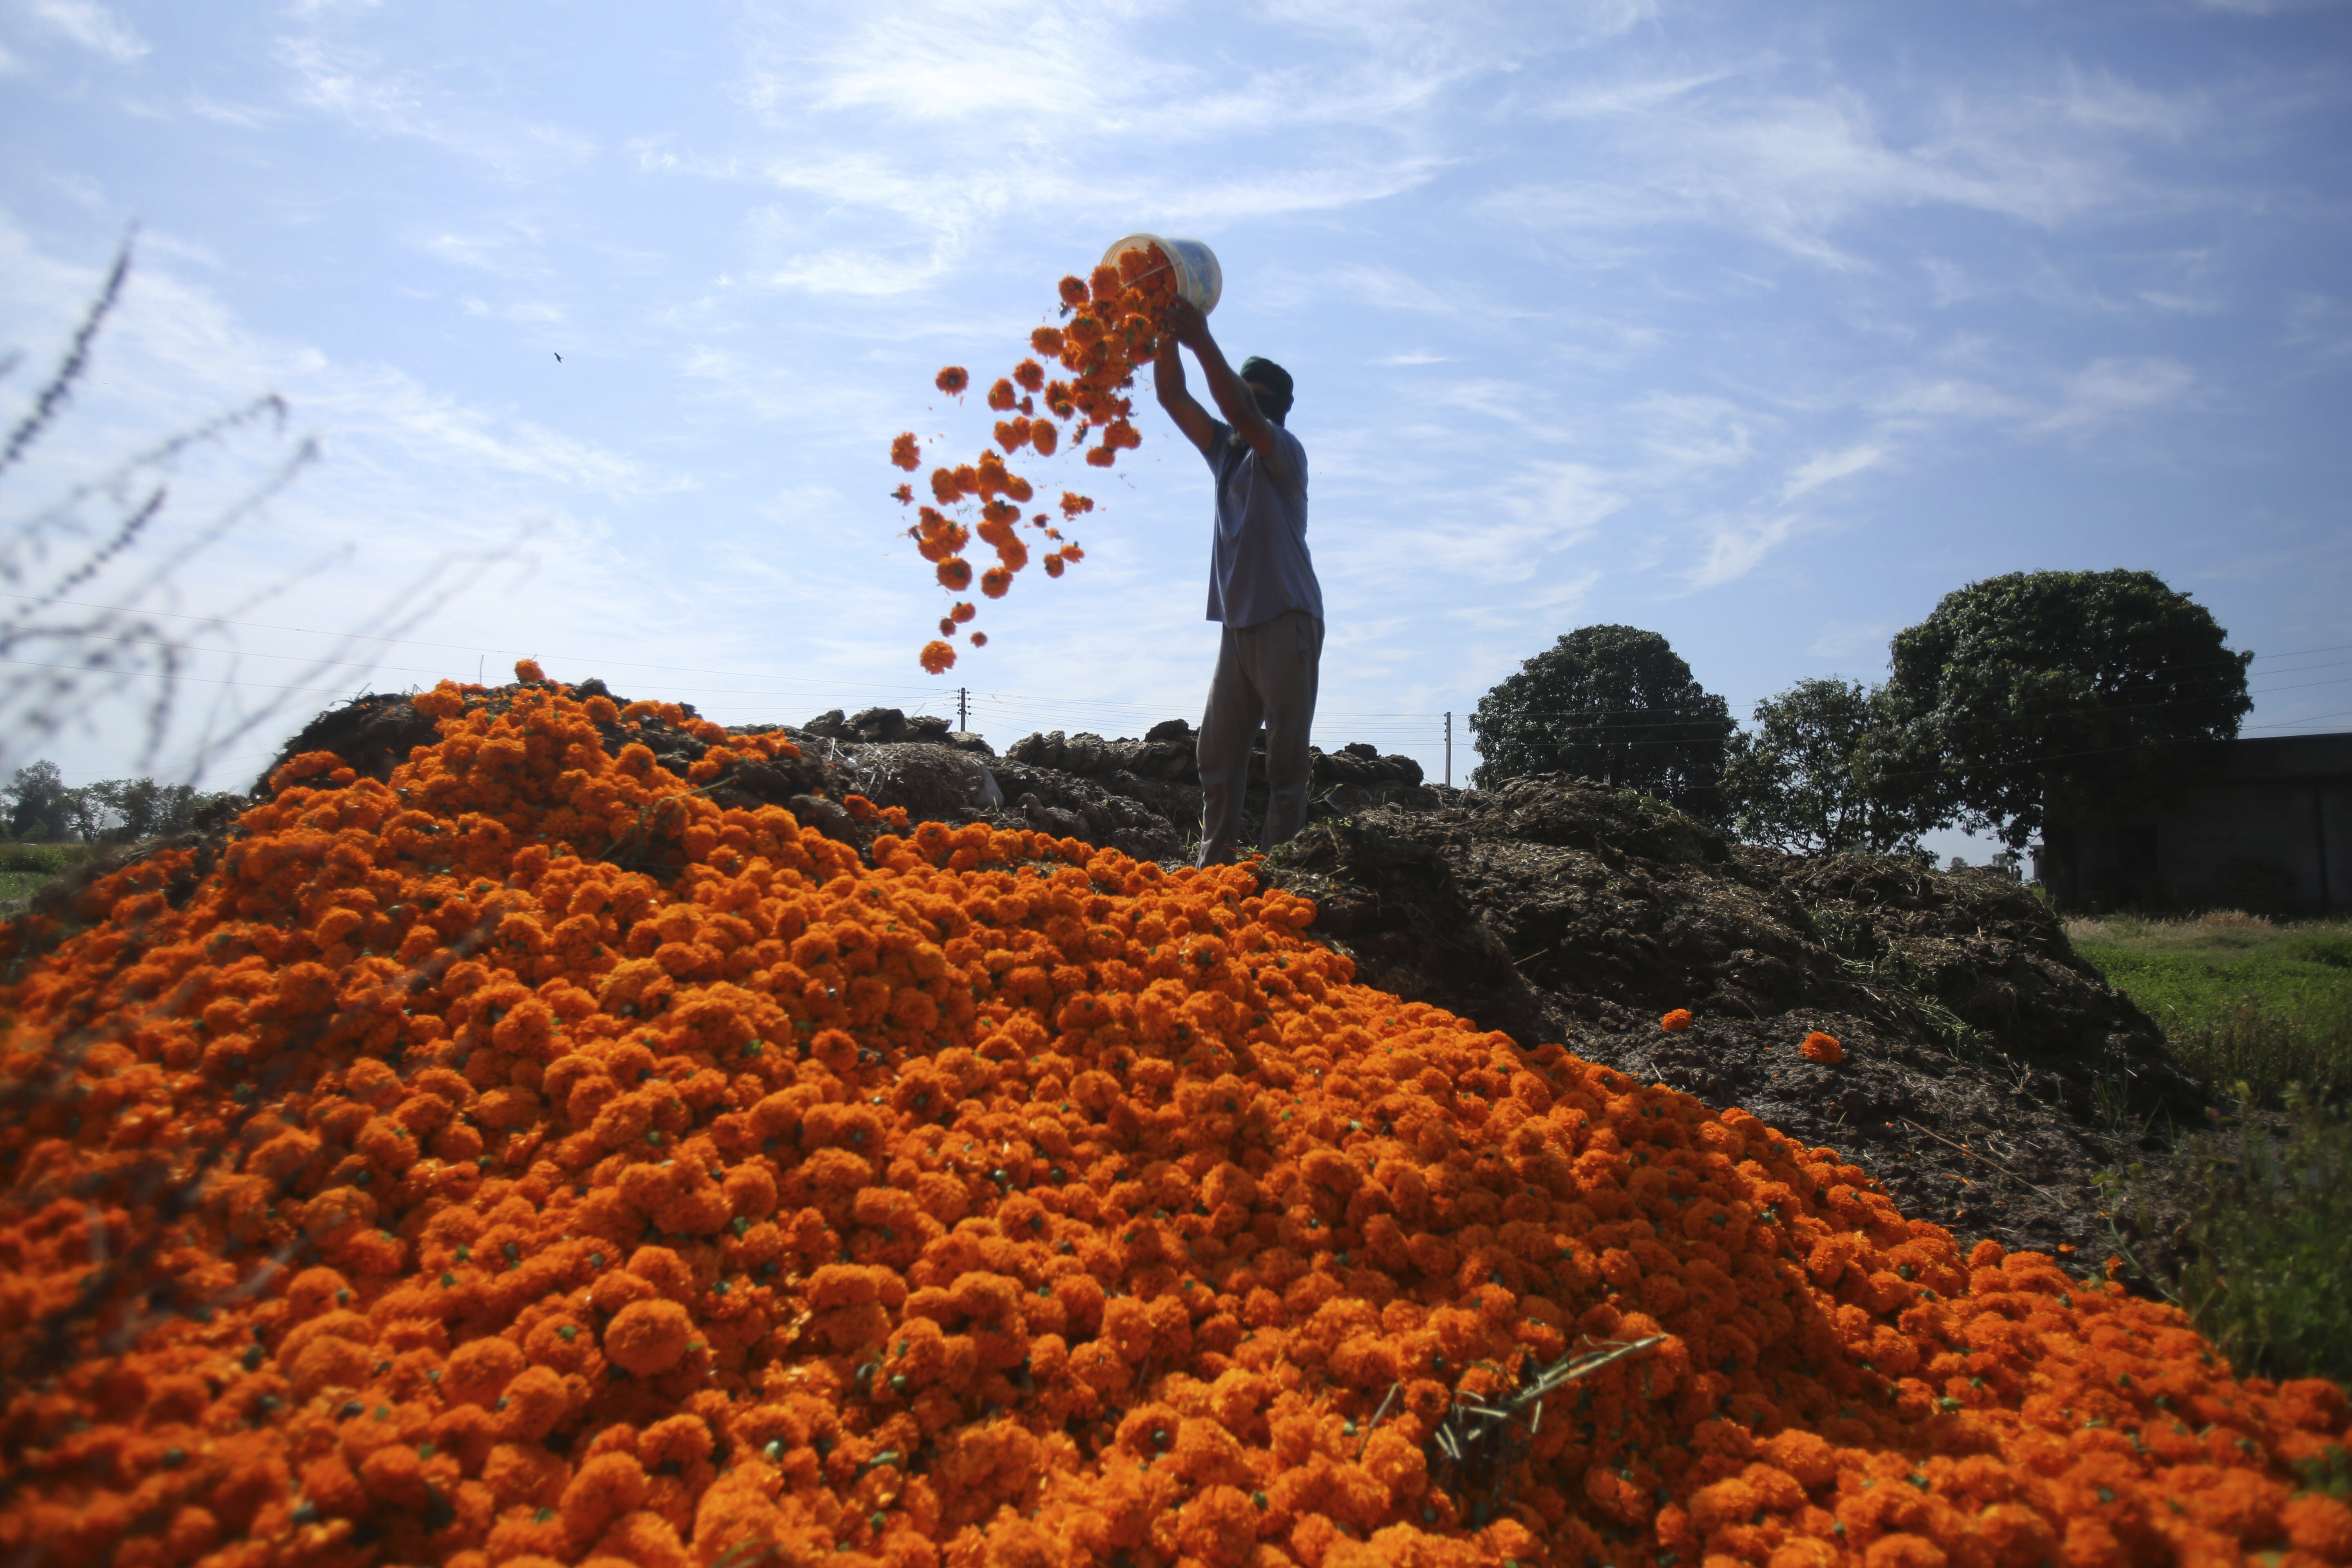 An Indian farmer throws to dump waste marigold flowers in his farm during lockdown on the outskirts of Jammu, India, Wednesday, April 22, 2020. India has reported nearly 20,000 confirmed cases of COVID-19 and over 600 deaths. (AP Photo/ Channi Anand)